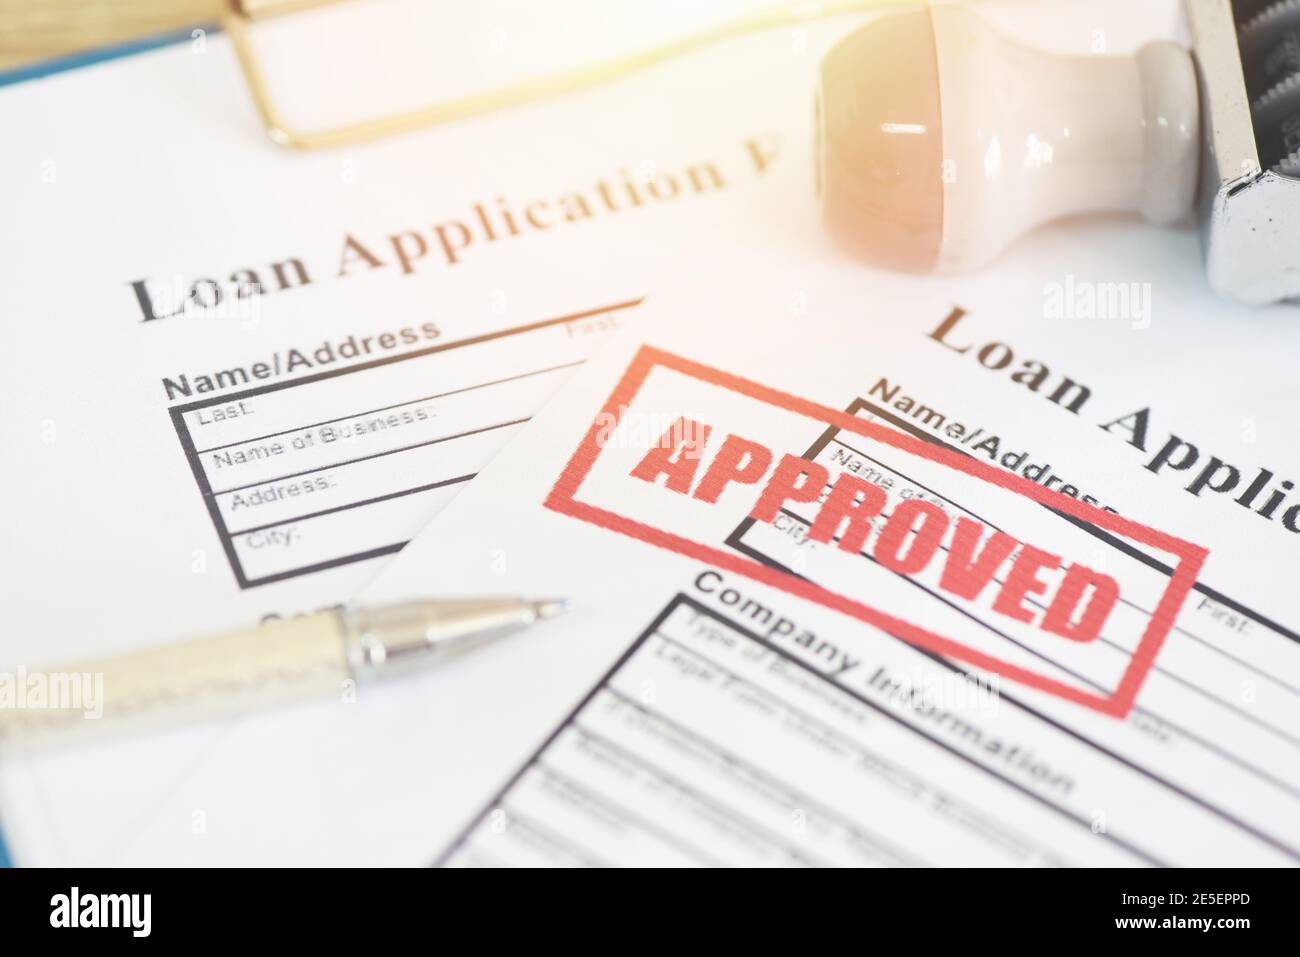 Loan application form with Rubber stamping that says Loan Approved, Financial loan money contract agreement company credit or person - loan approval Stock Photo